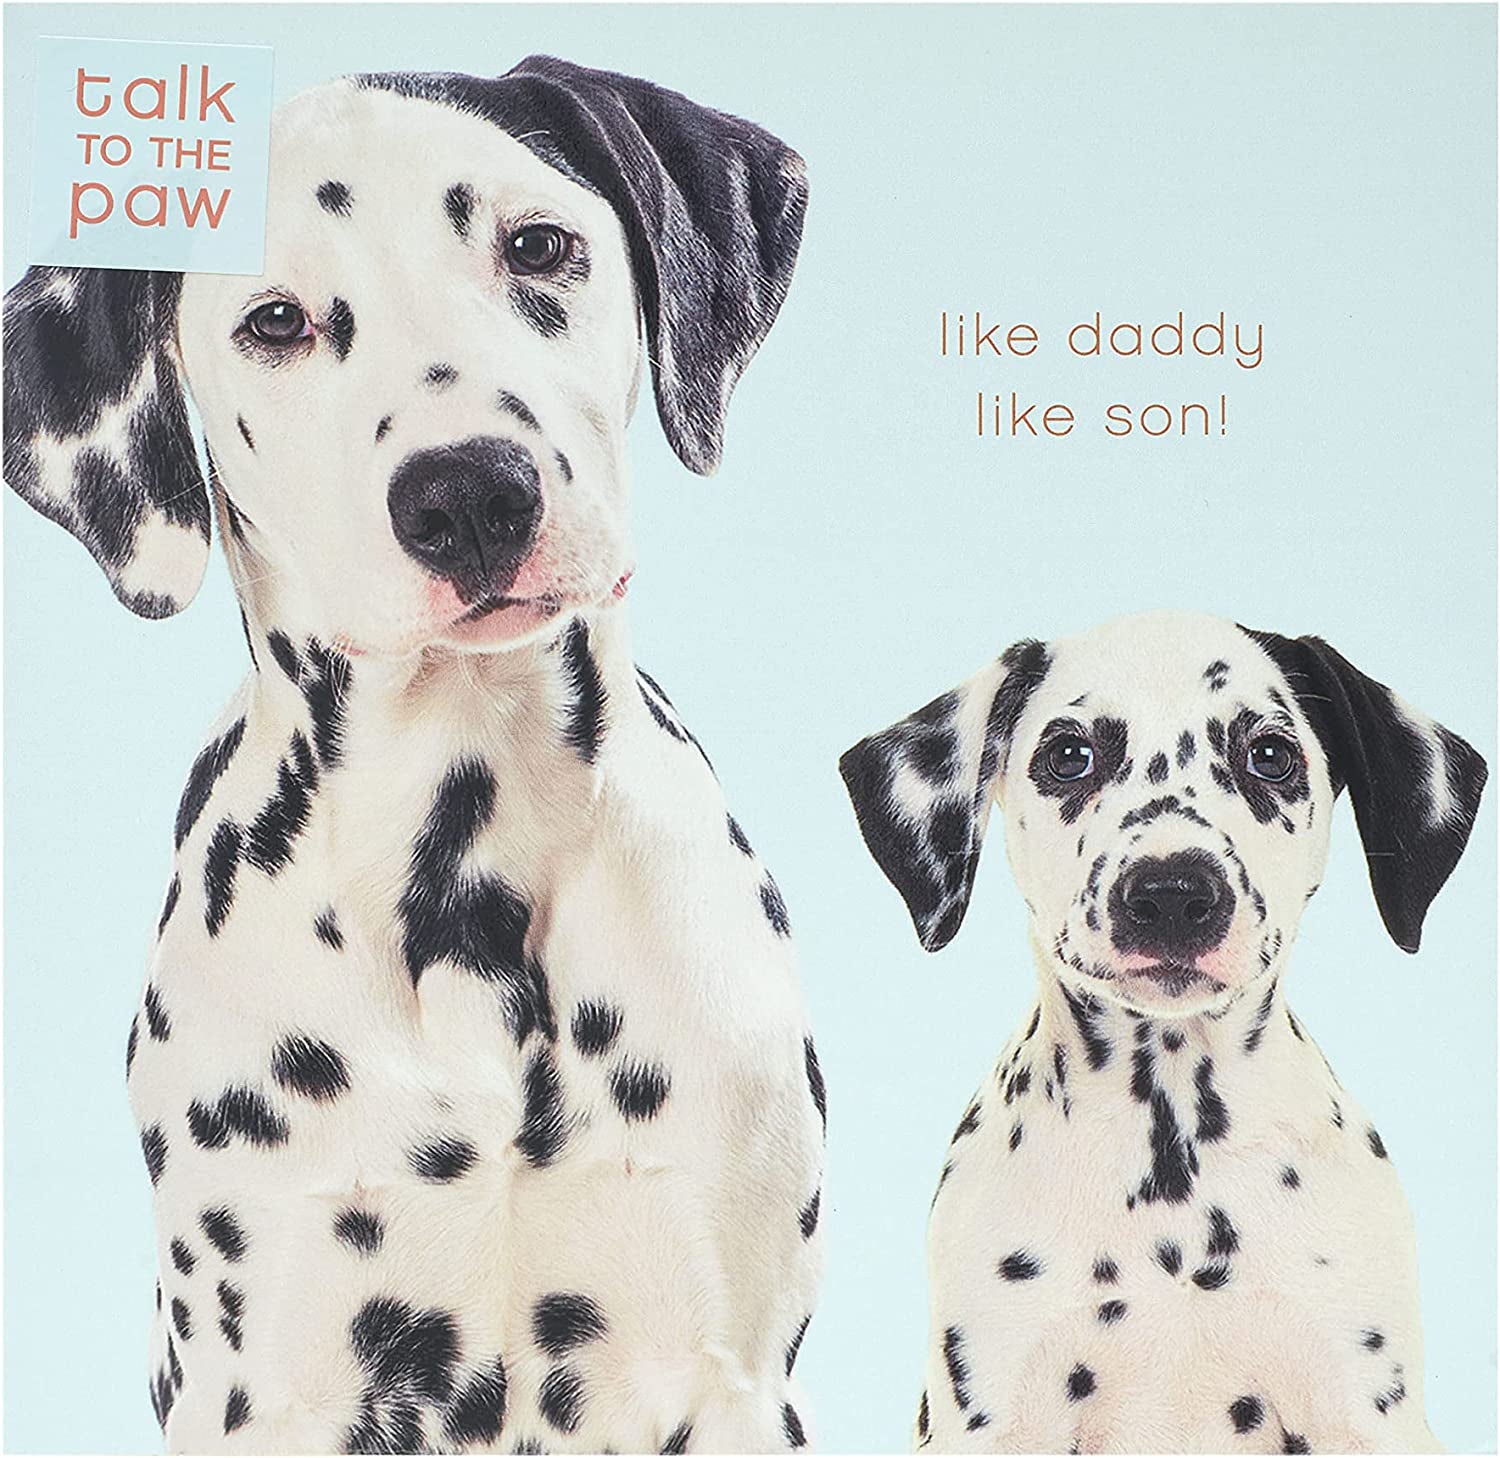 UK Greetings, Father'S Day Card from Son - like Daddy like Son Father'S Day Card - Cute Father'S Day Card - Dalmation Father'S Day Card - Dog Father'S Day Card